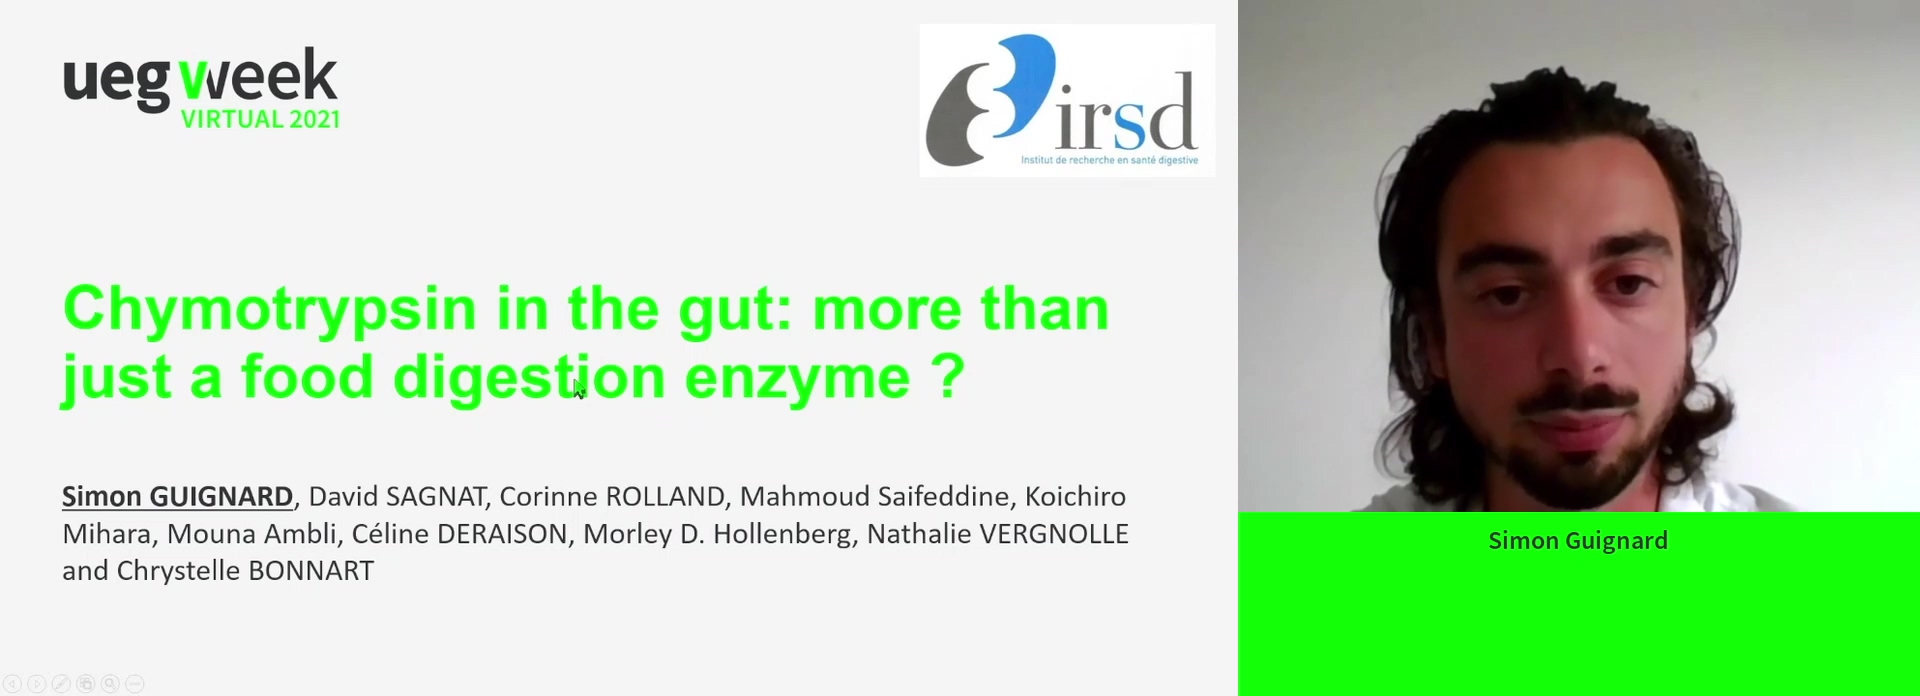 CHYMOTRYPSIN IN THE GUT: MORE THAN JUST A FOOD DIGESTION ENZYME